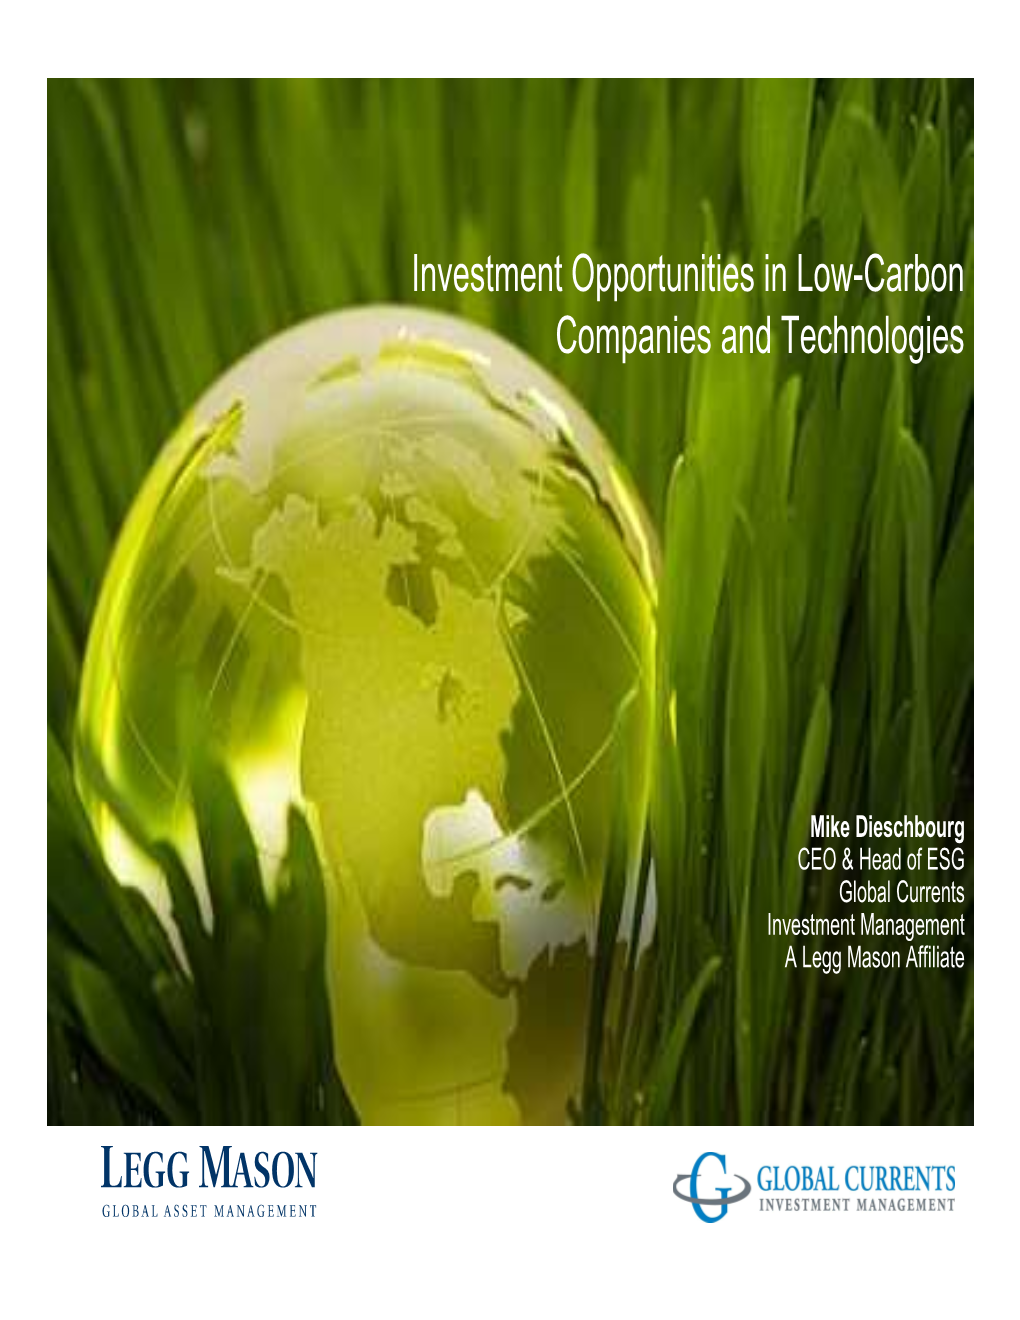 Investment Opportunities in Low-Carbon Companies and Technologies